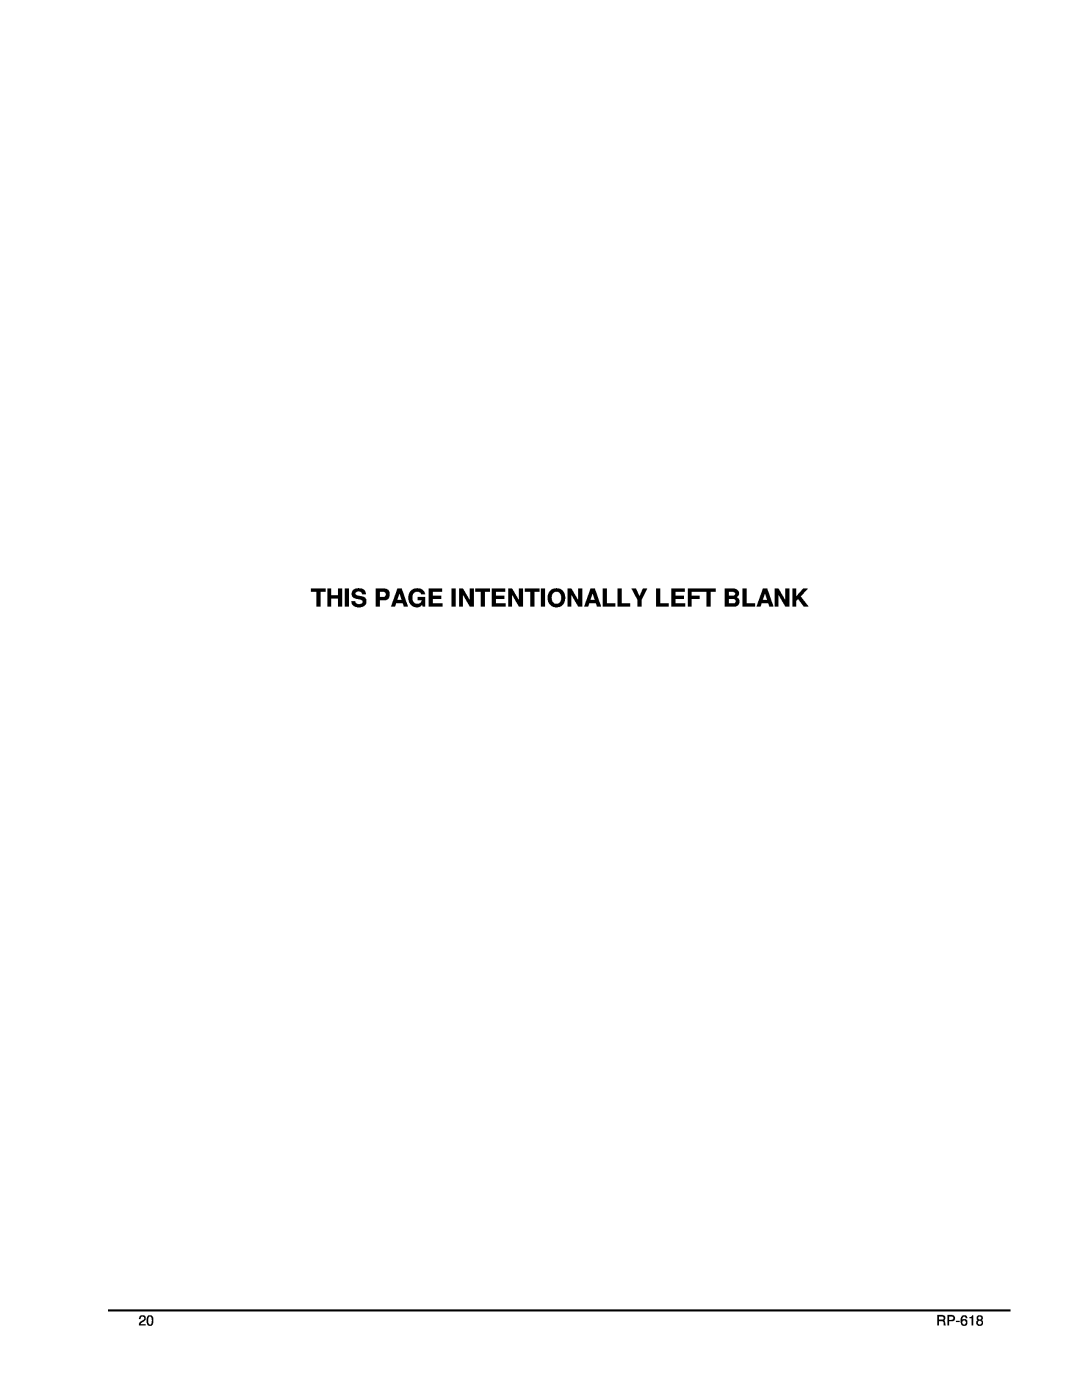 Goodman Mfg CPC180, 15-TON COMMERCIAL PKG AC manual This Page Intentionally Left Blank, RP-618 